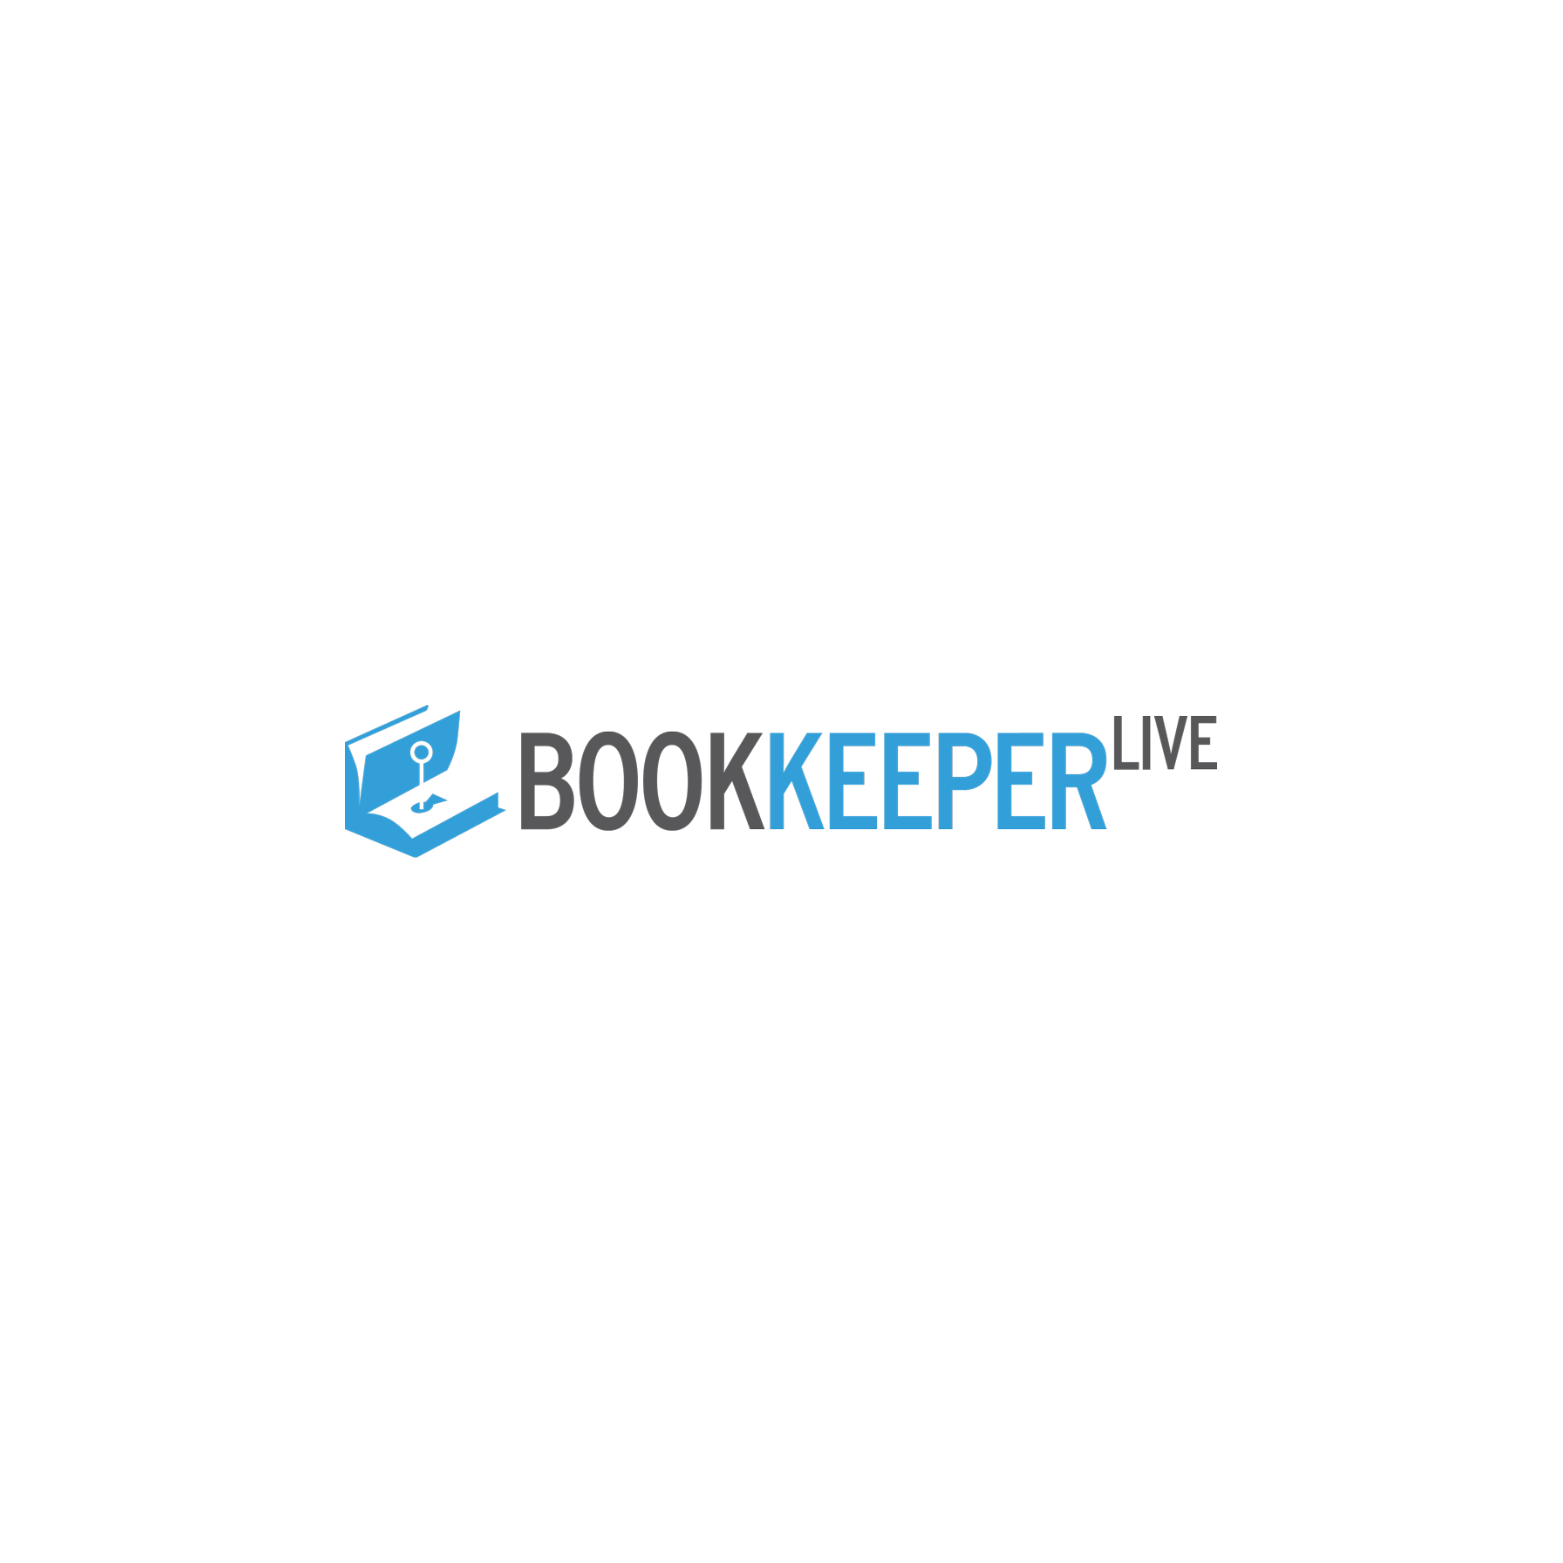 BookkeeperLive|Legal Services|Professional Services